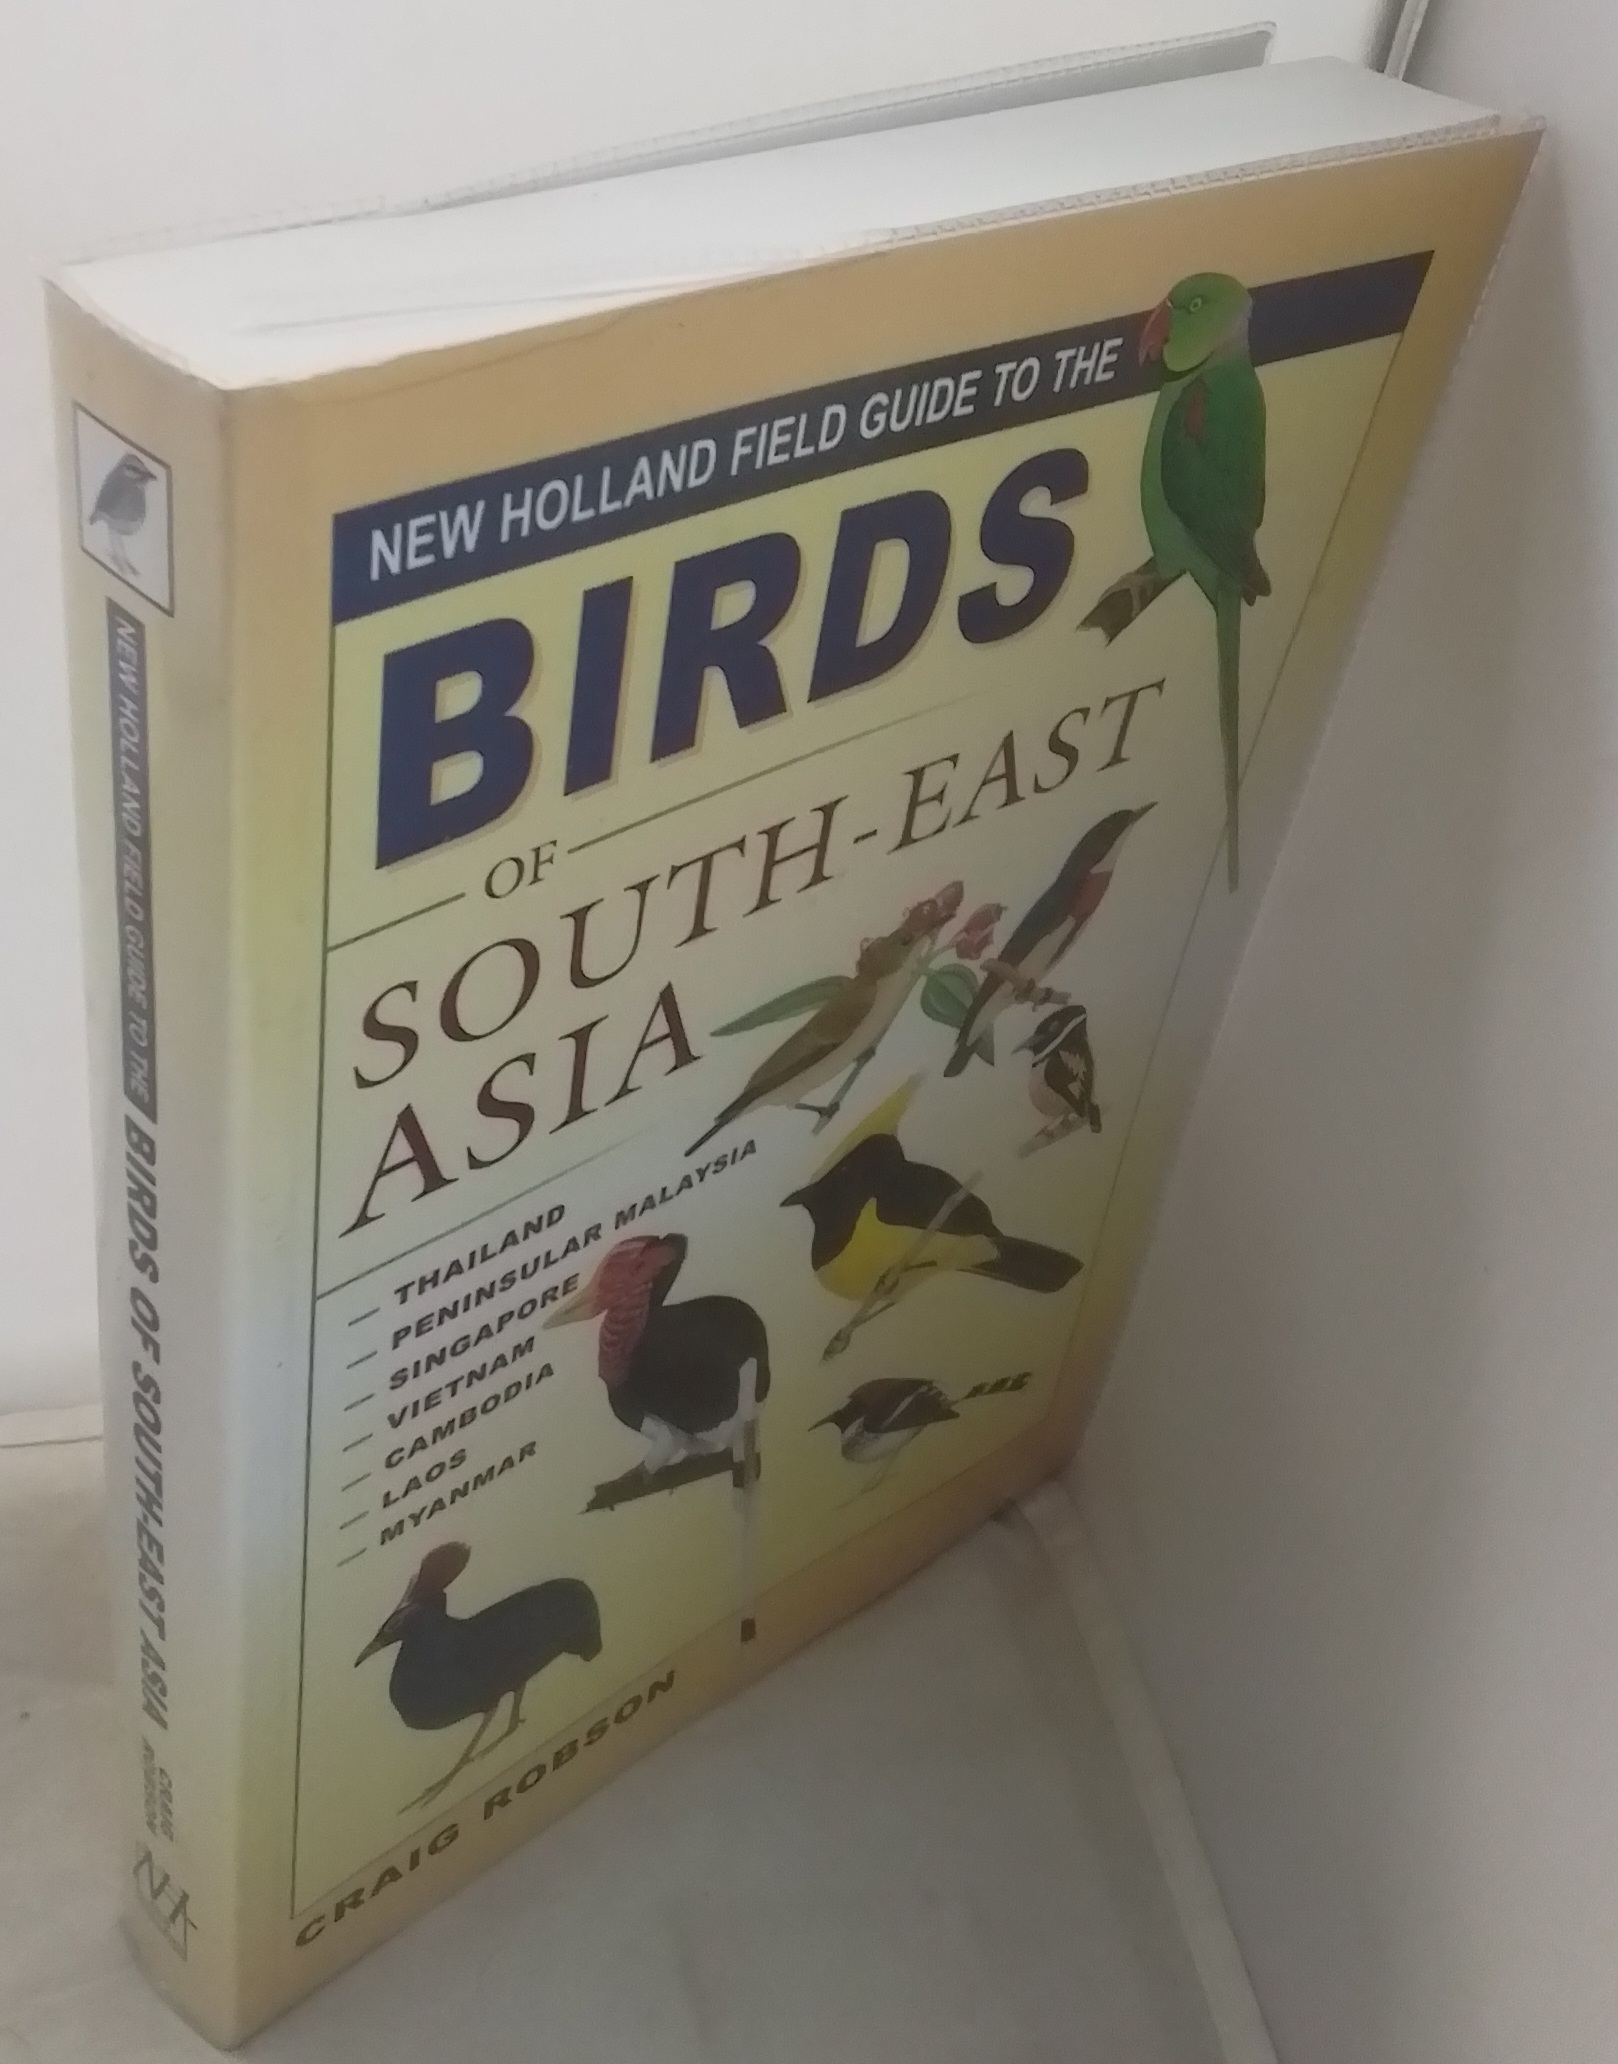 New Holland Field Guide to the Birds of South-East Asia. Thailand, Peninsular Malaysia, Singapore, Vietnam, Cambodia, Laos, Myanmar. - ROBSON, Craig.